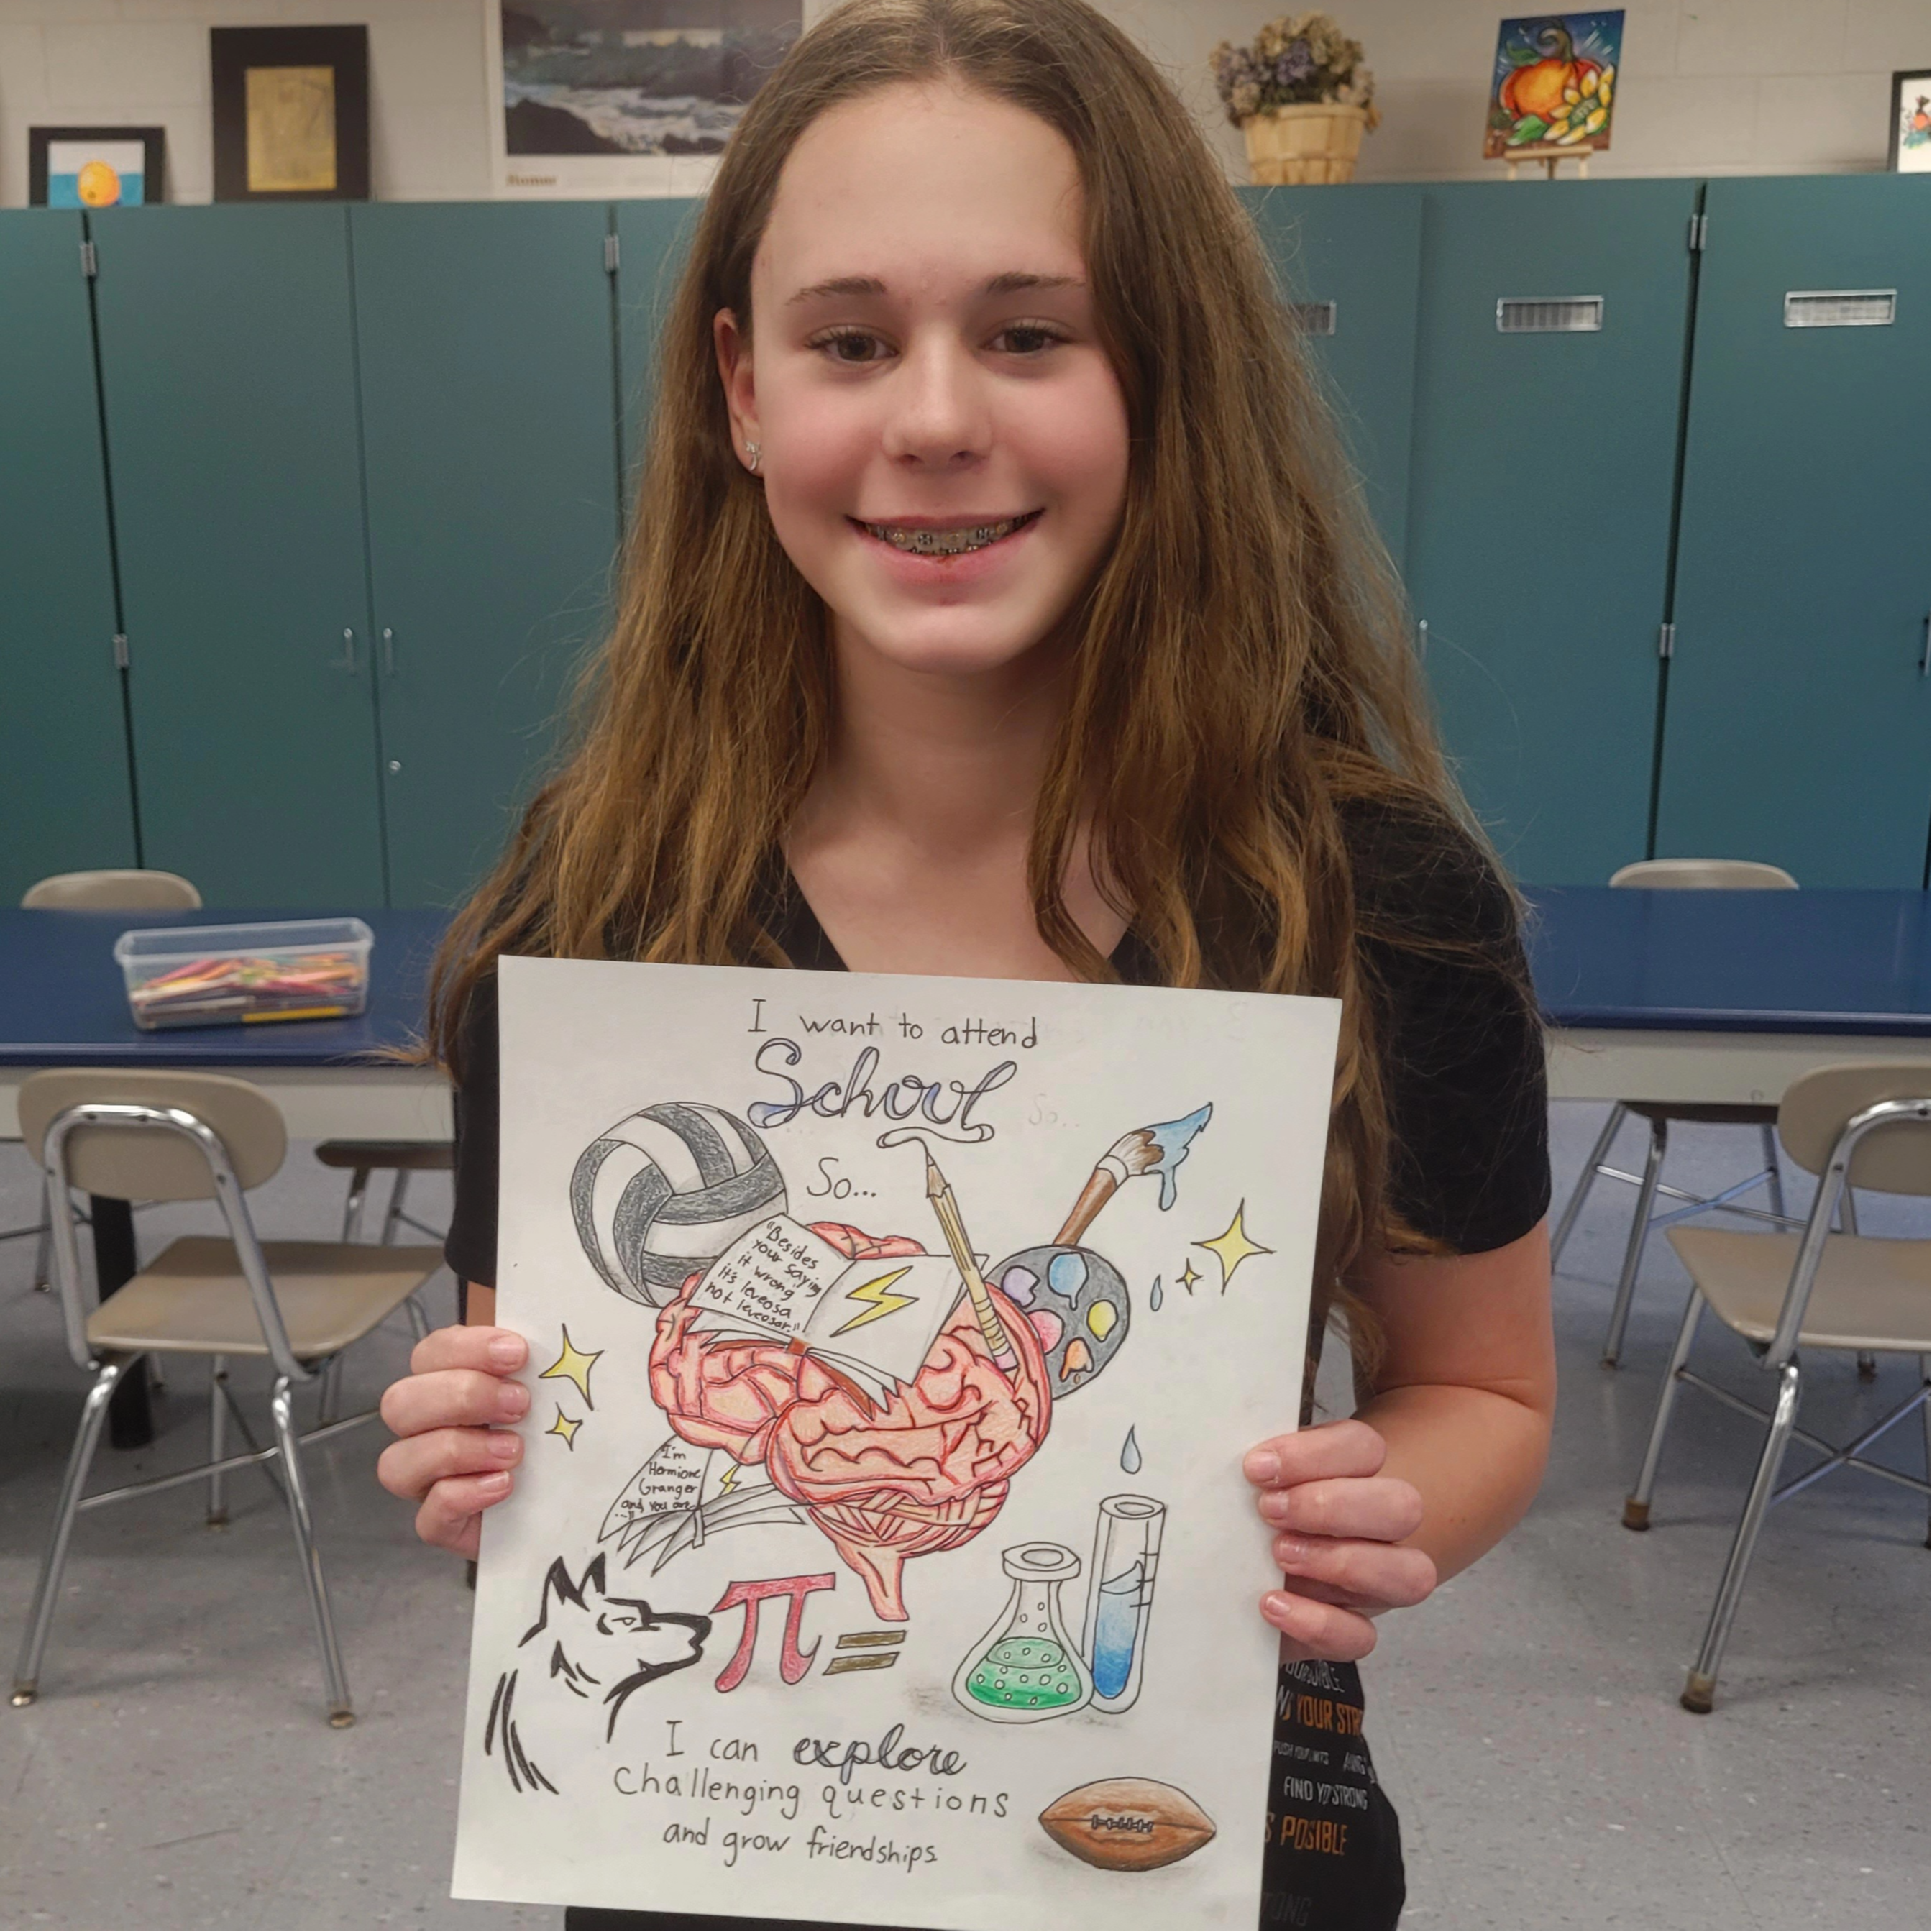 Congratulations to our CMS 6th Grader who has won the art contest for Attendance Awareness Month, partnered with Ohio Education